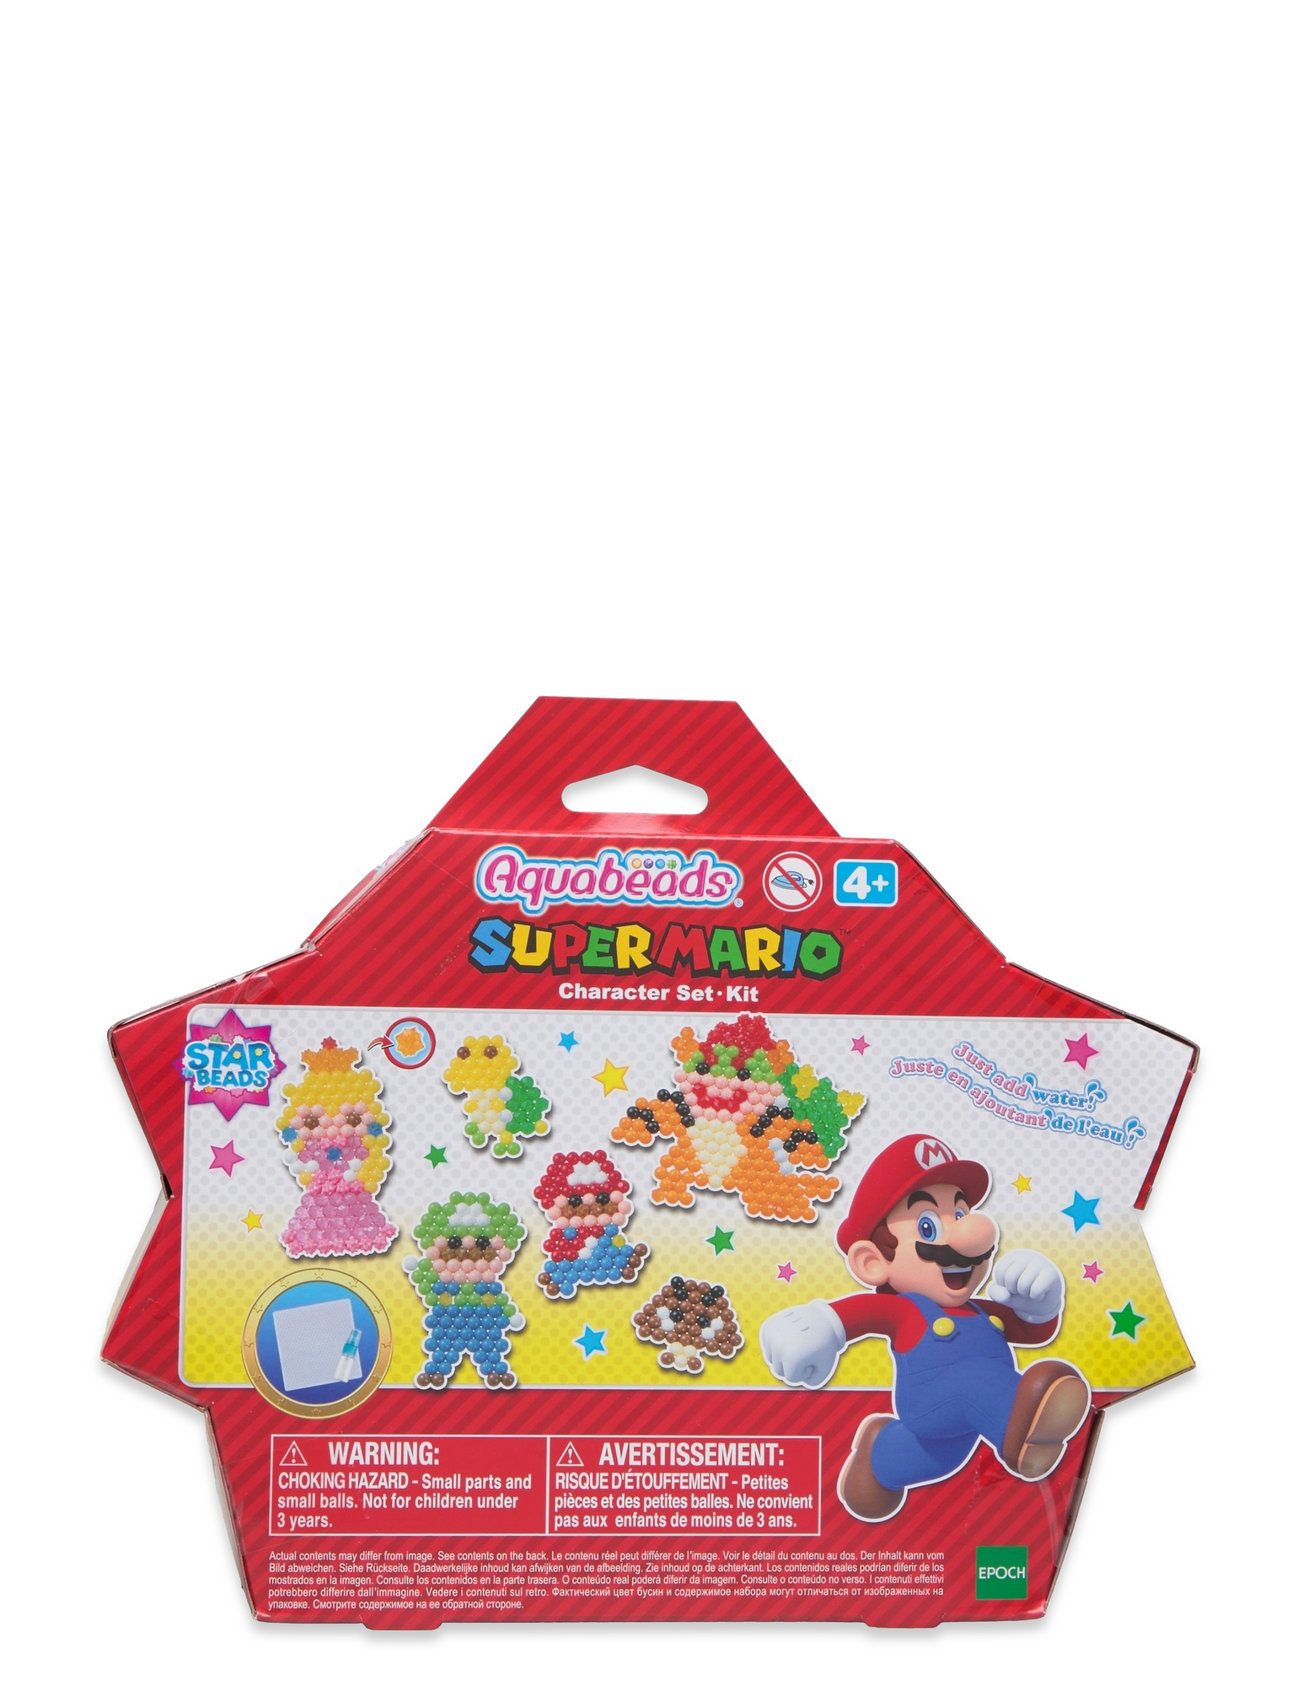 Super Mario Character Set Toys Creativity Drawing & Crafts Craft Pearls Multi/patterned Aqua Beads